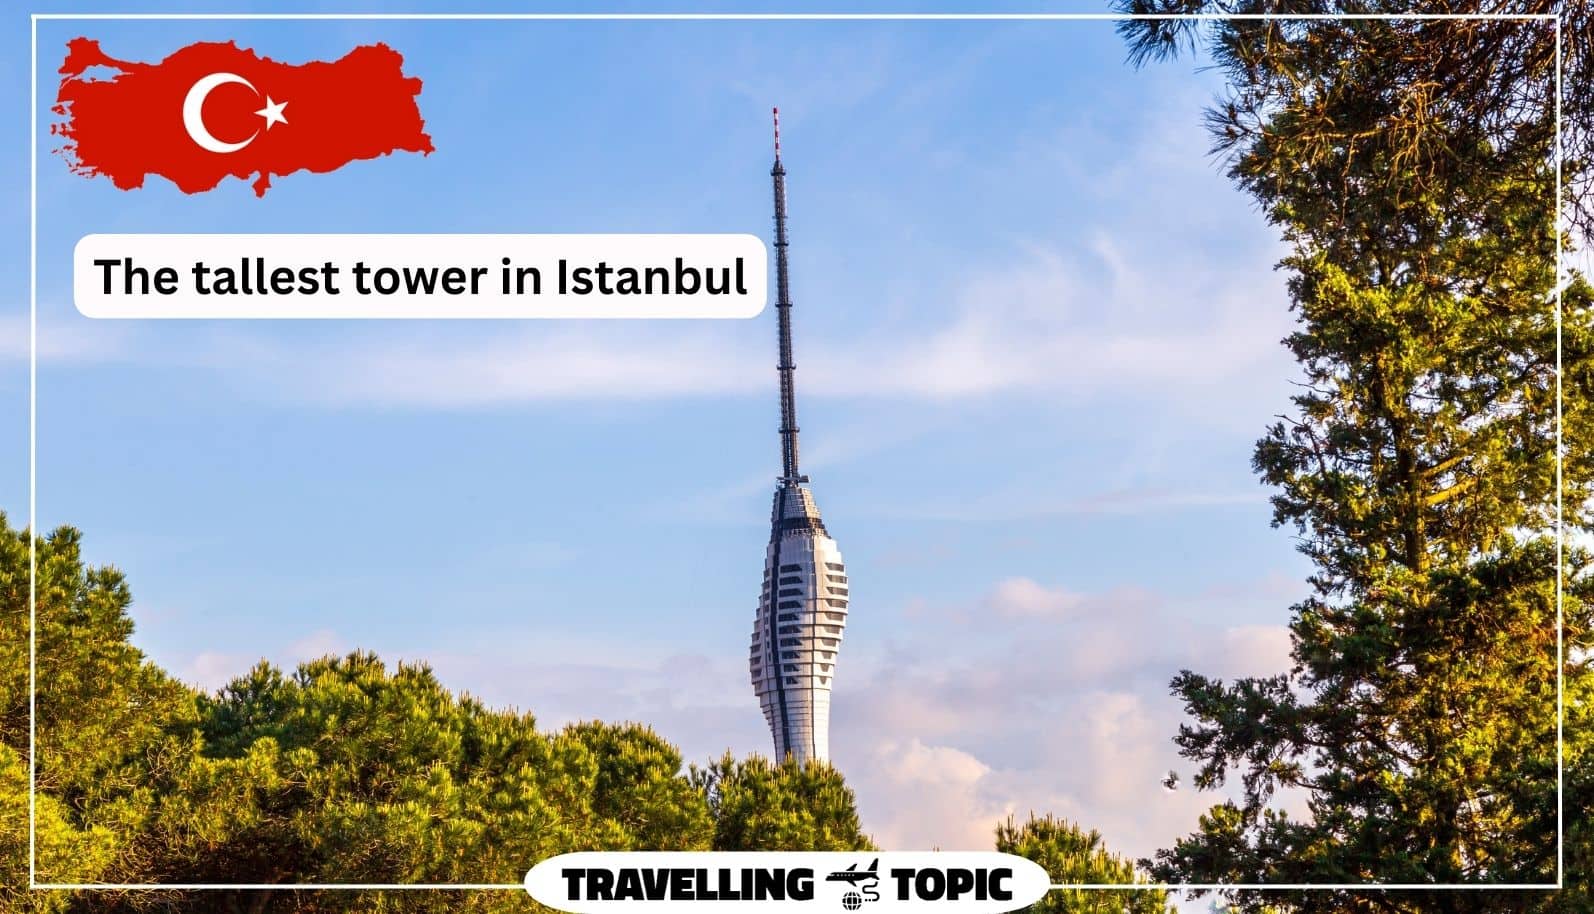 The tallest tower in Istanbul